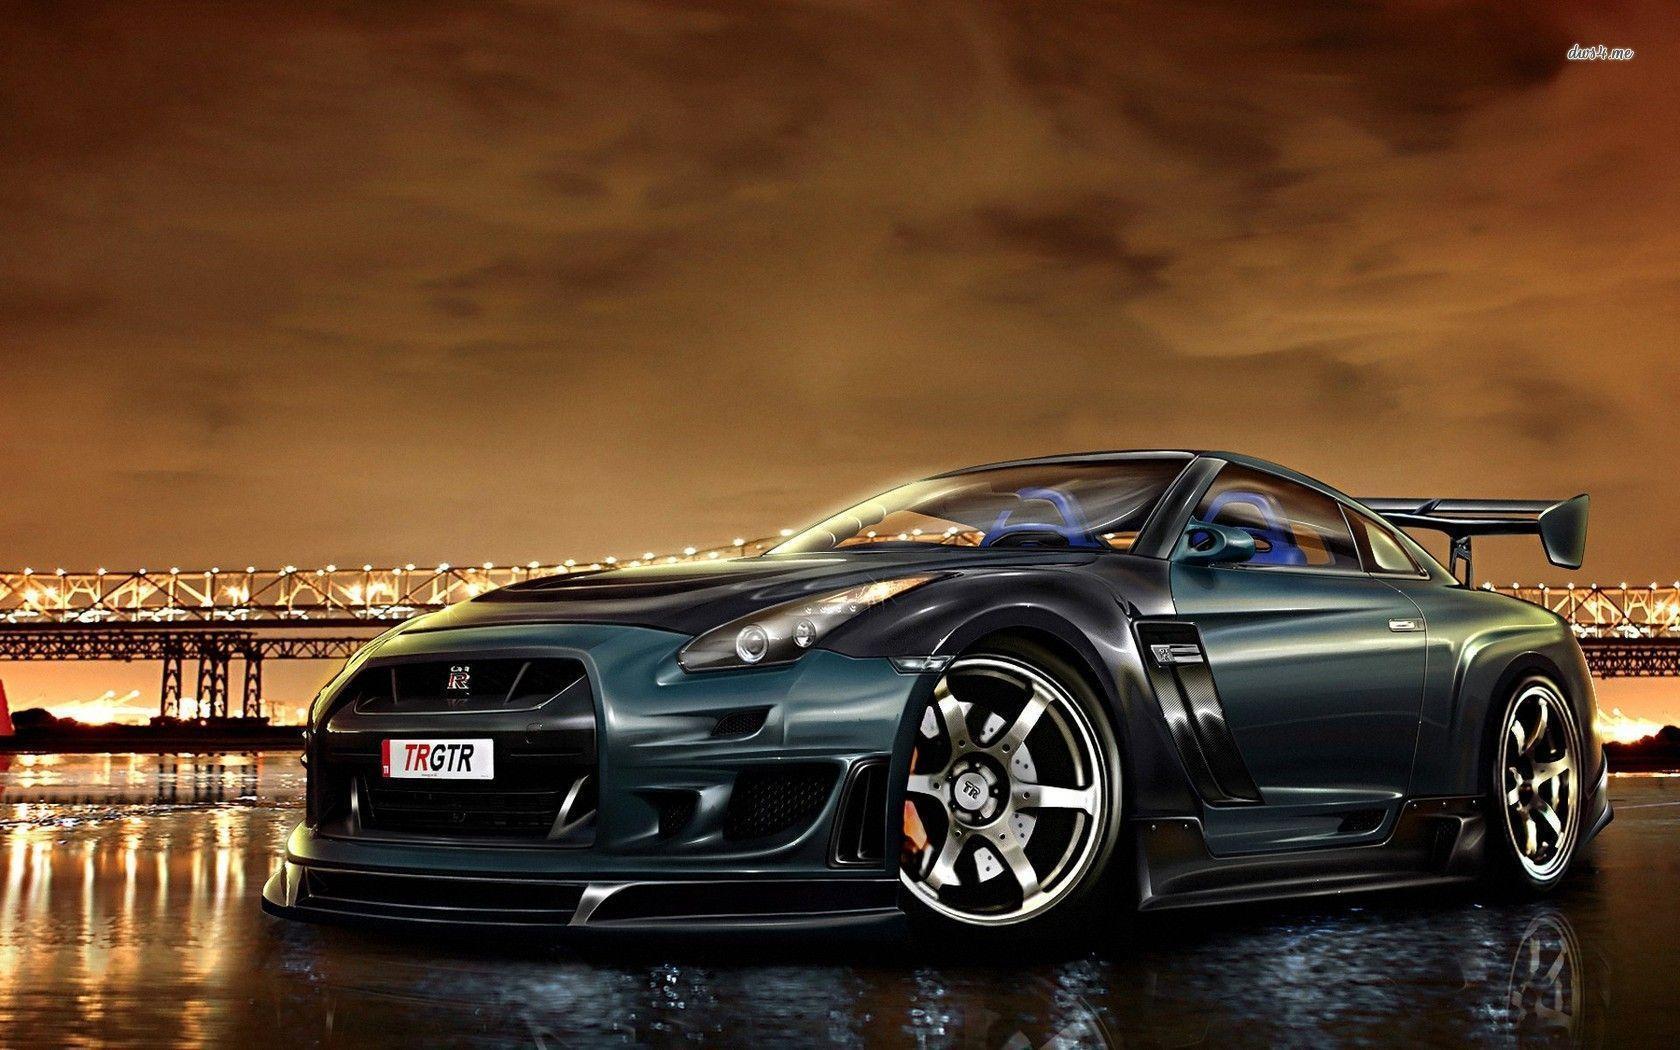 Related Picture Nissan Skyline Wallpaper Car Wallpaper Picture